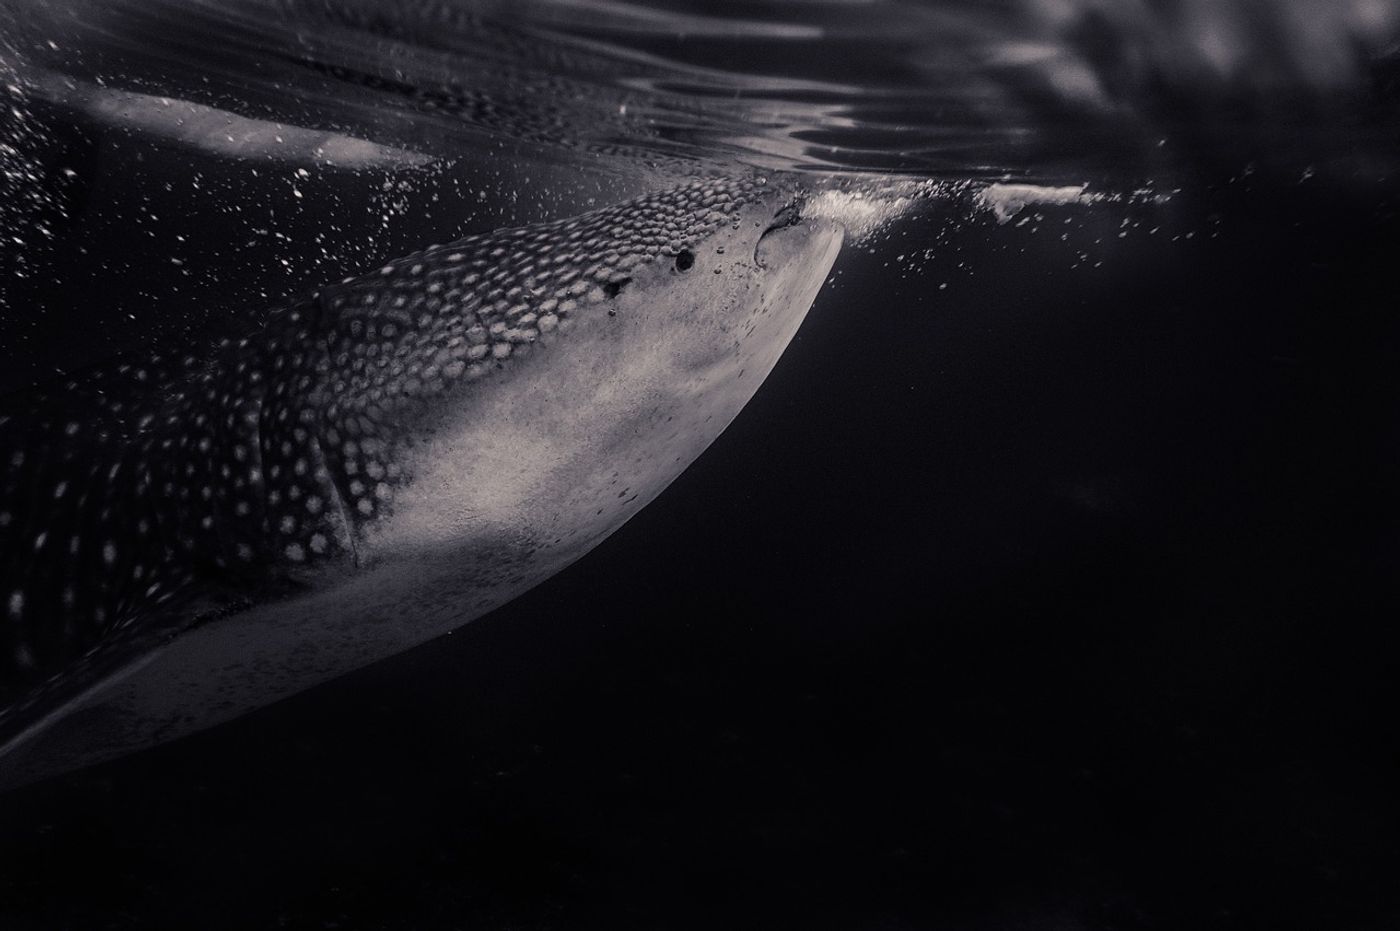 It's not a whale, and it's probably not what you imagine when you think of a shark. But it's a whale shark!